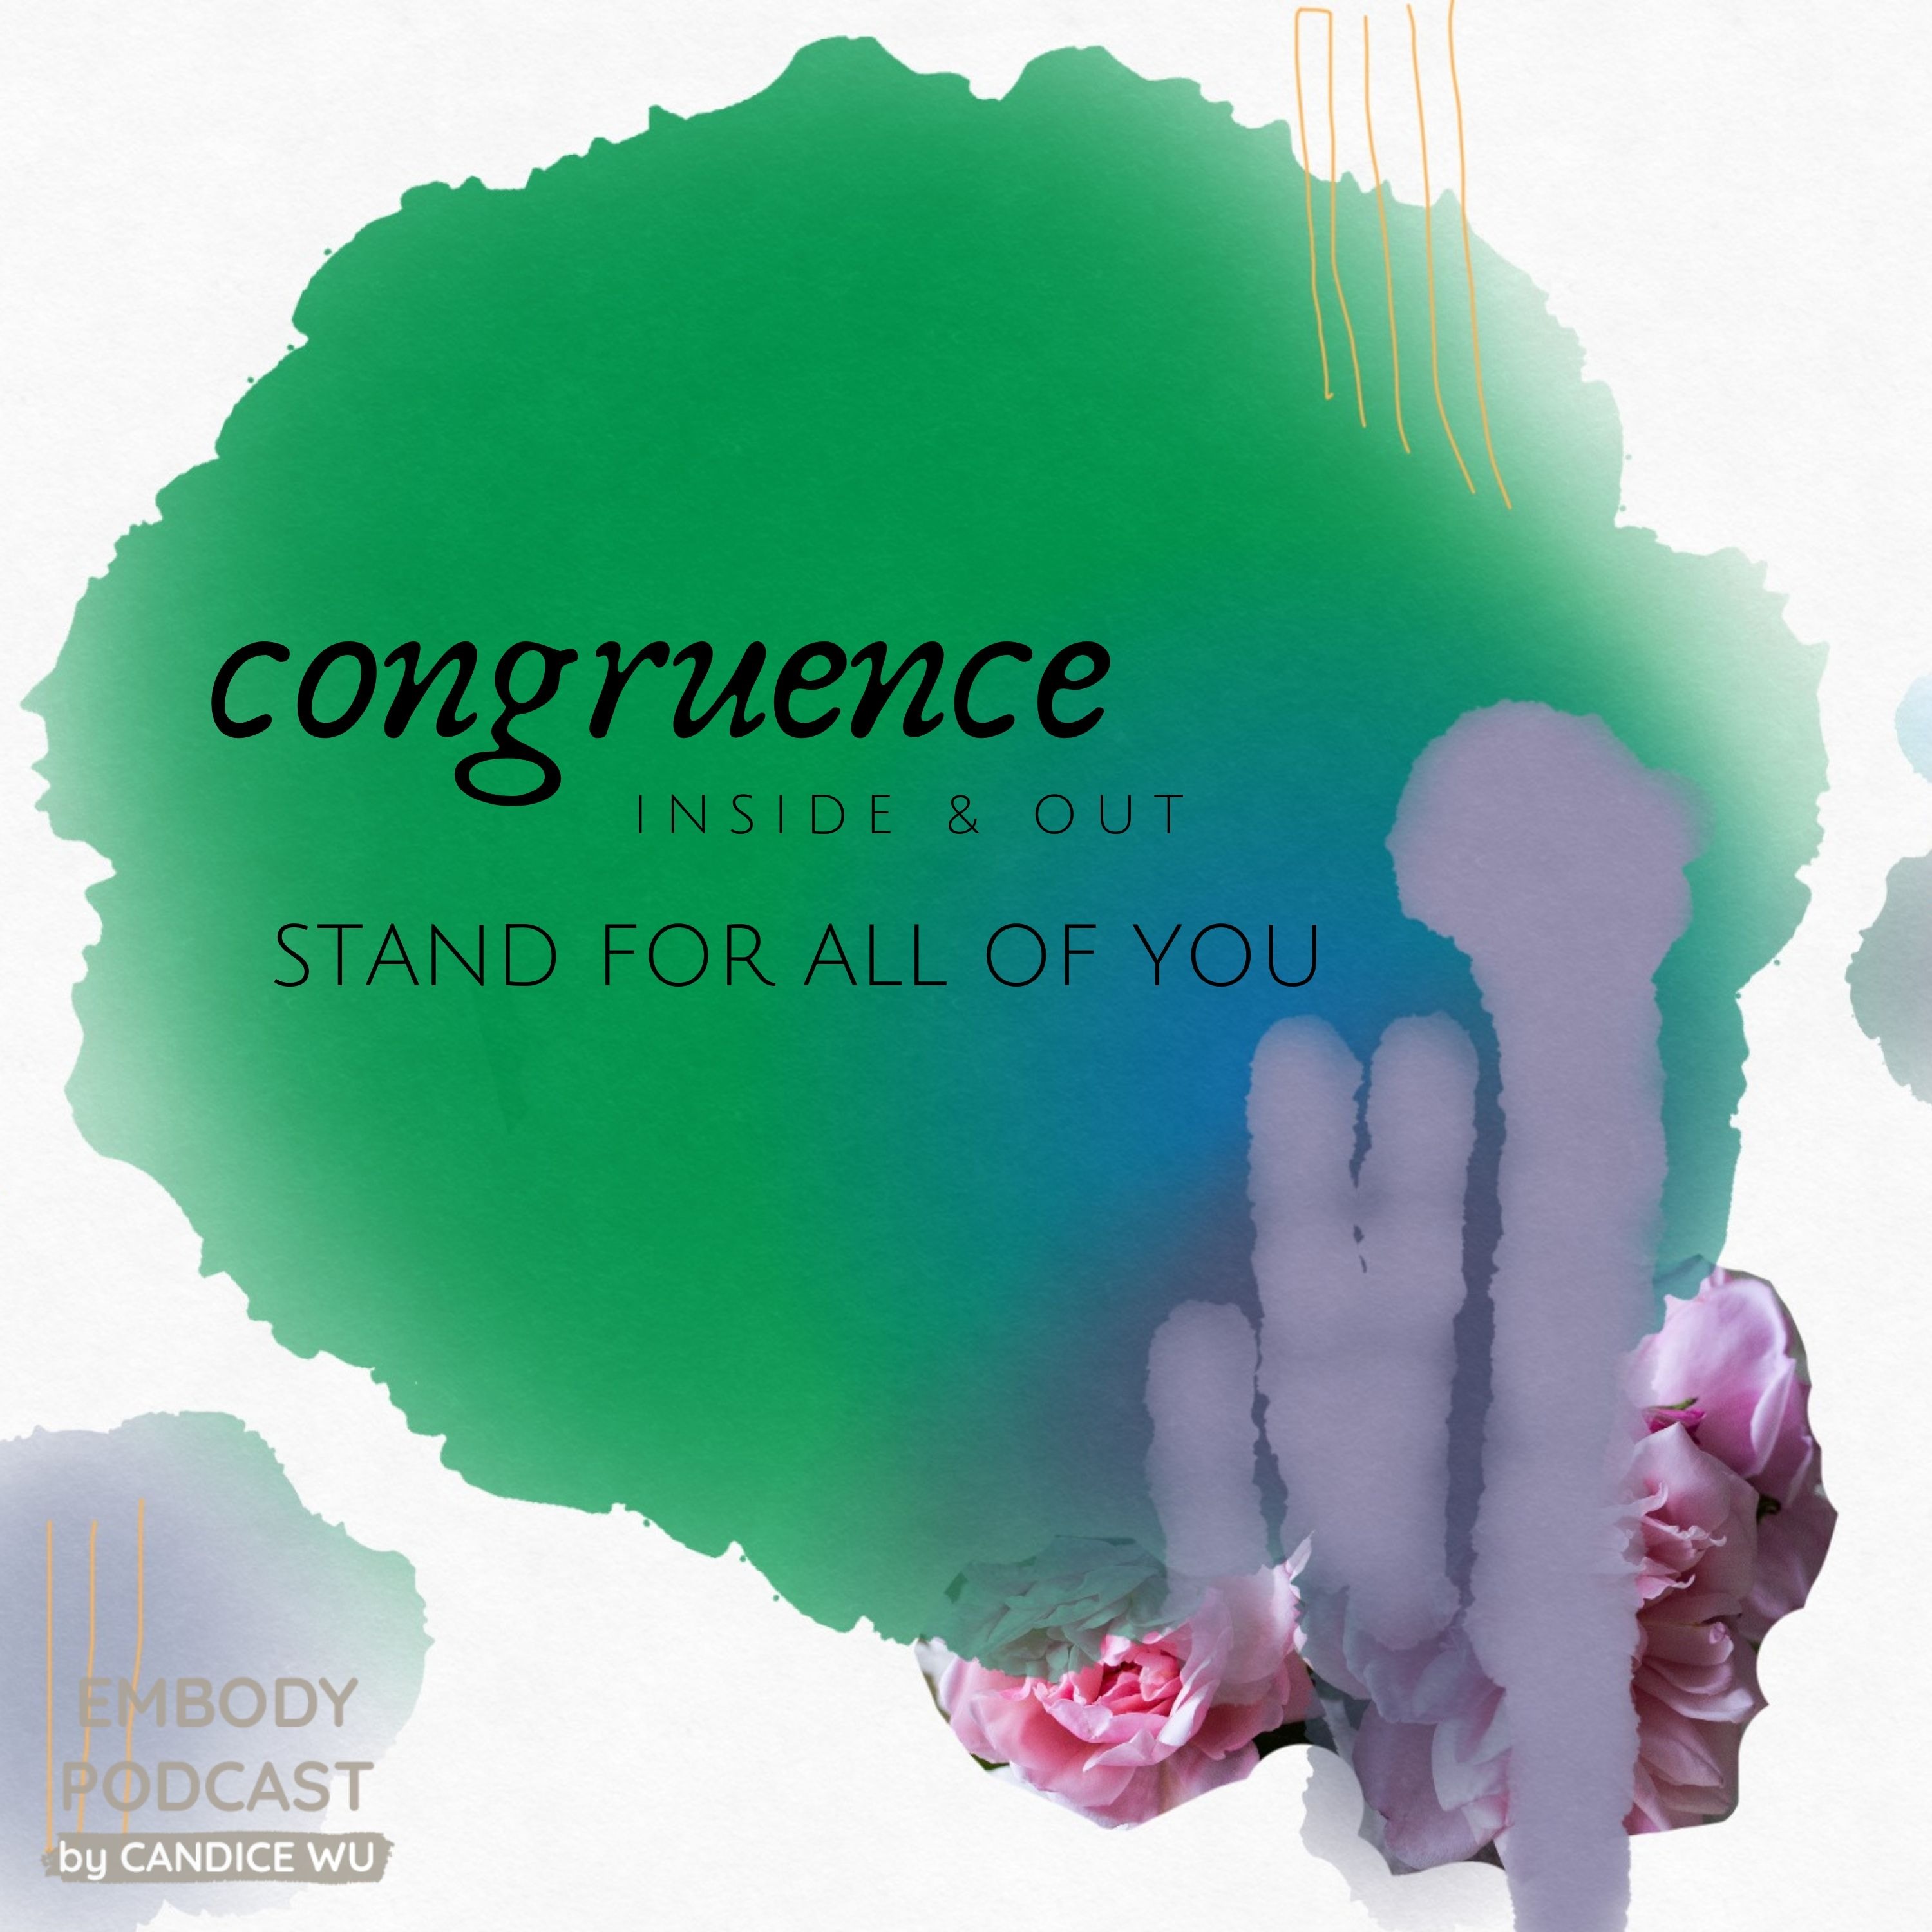 80: Congruence Inside & Out: Stand For All Of You